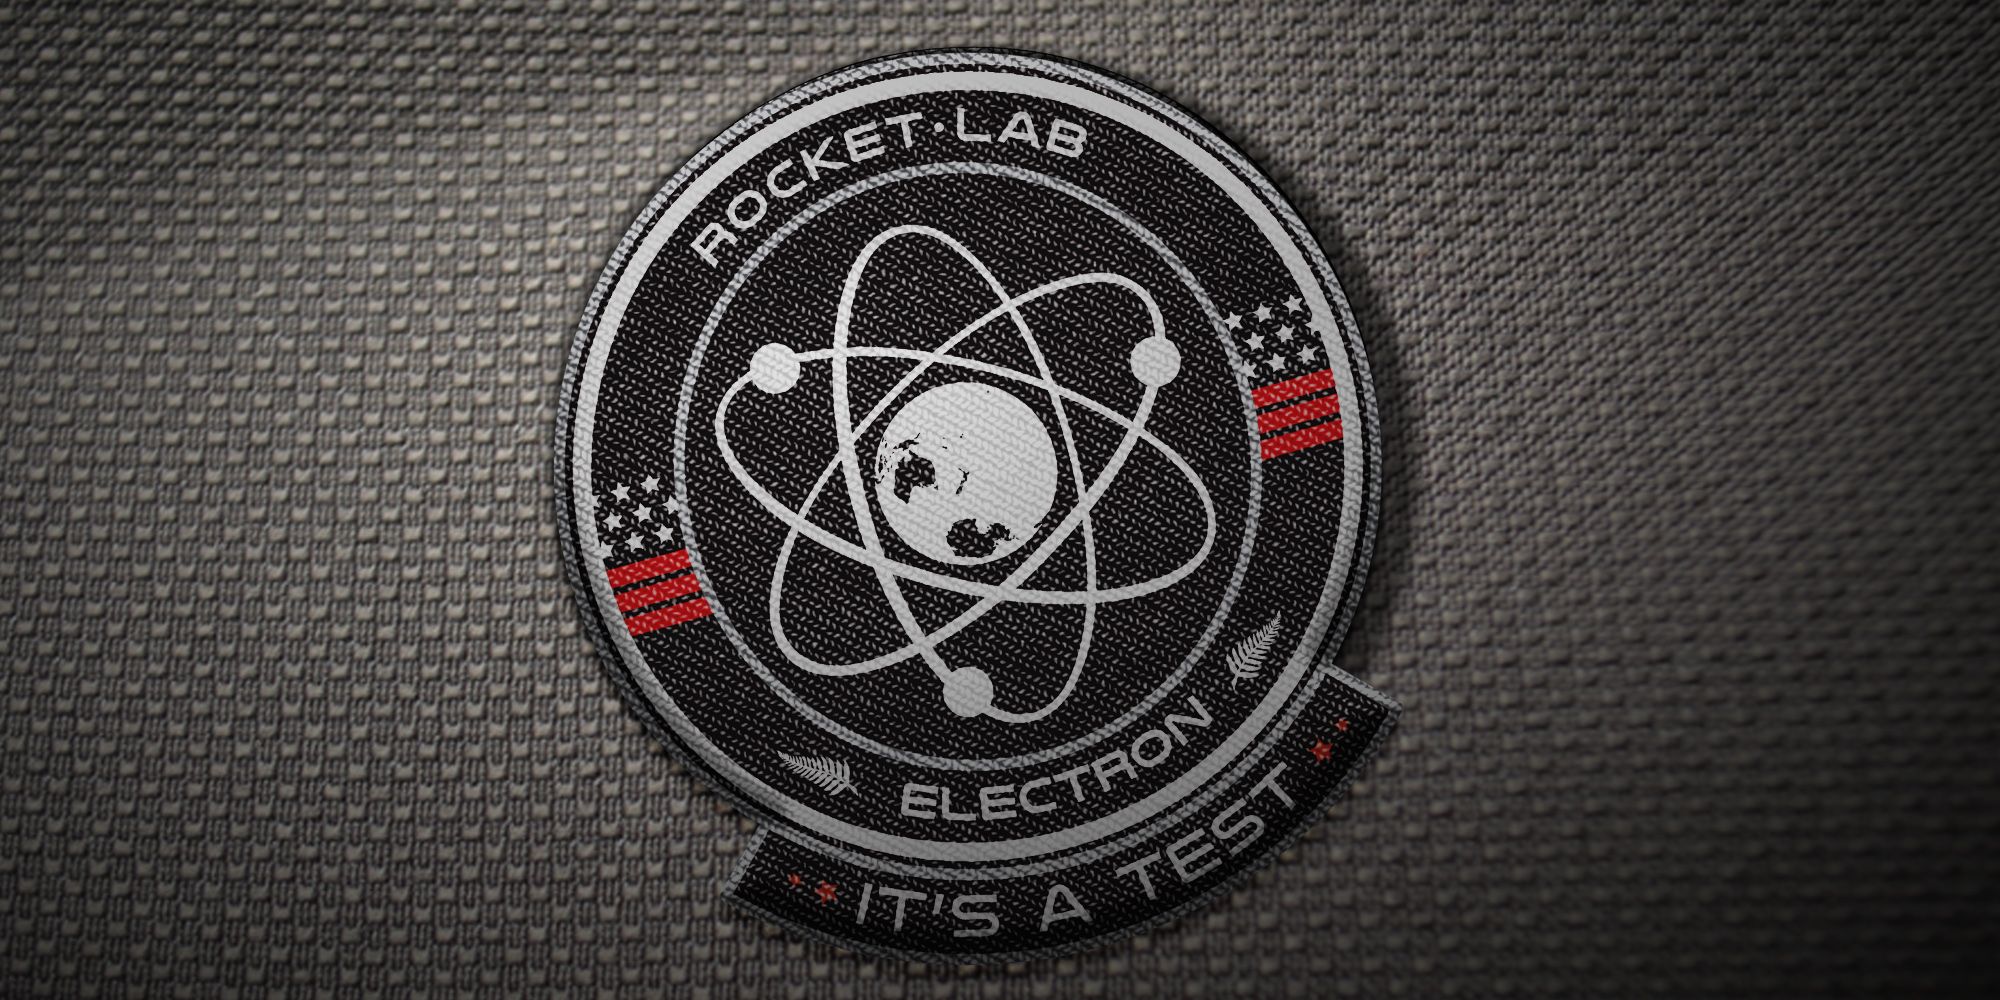 electron-test-launch-window-mission-patch